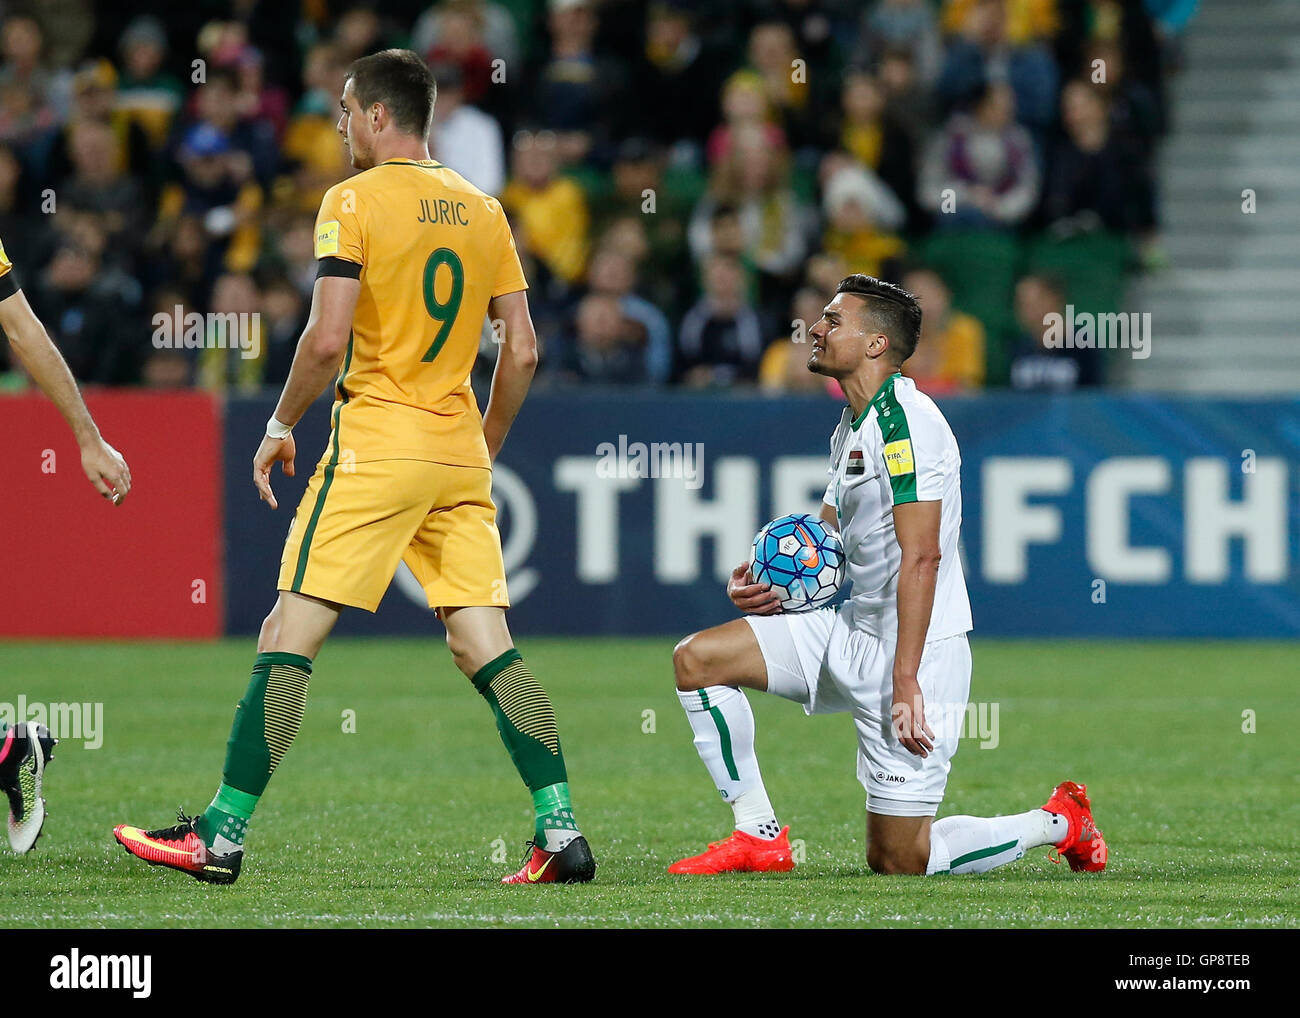 Perth, Western Australia, Australia. 1st Sep, 2016. AHMED YASEEN GHENI of Iraq reacts with the ball in his hands agains TOMI JURIC of Australia during the 2018 FIFA World Cup Asian Qualification match played at NIB Stadium on Sept 1, 2016 in Perth, Australia. © Theron Kirkman/ZUMA Wire/ZUMAPRESS.com/Alamy Live News Stock Photo